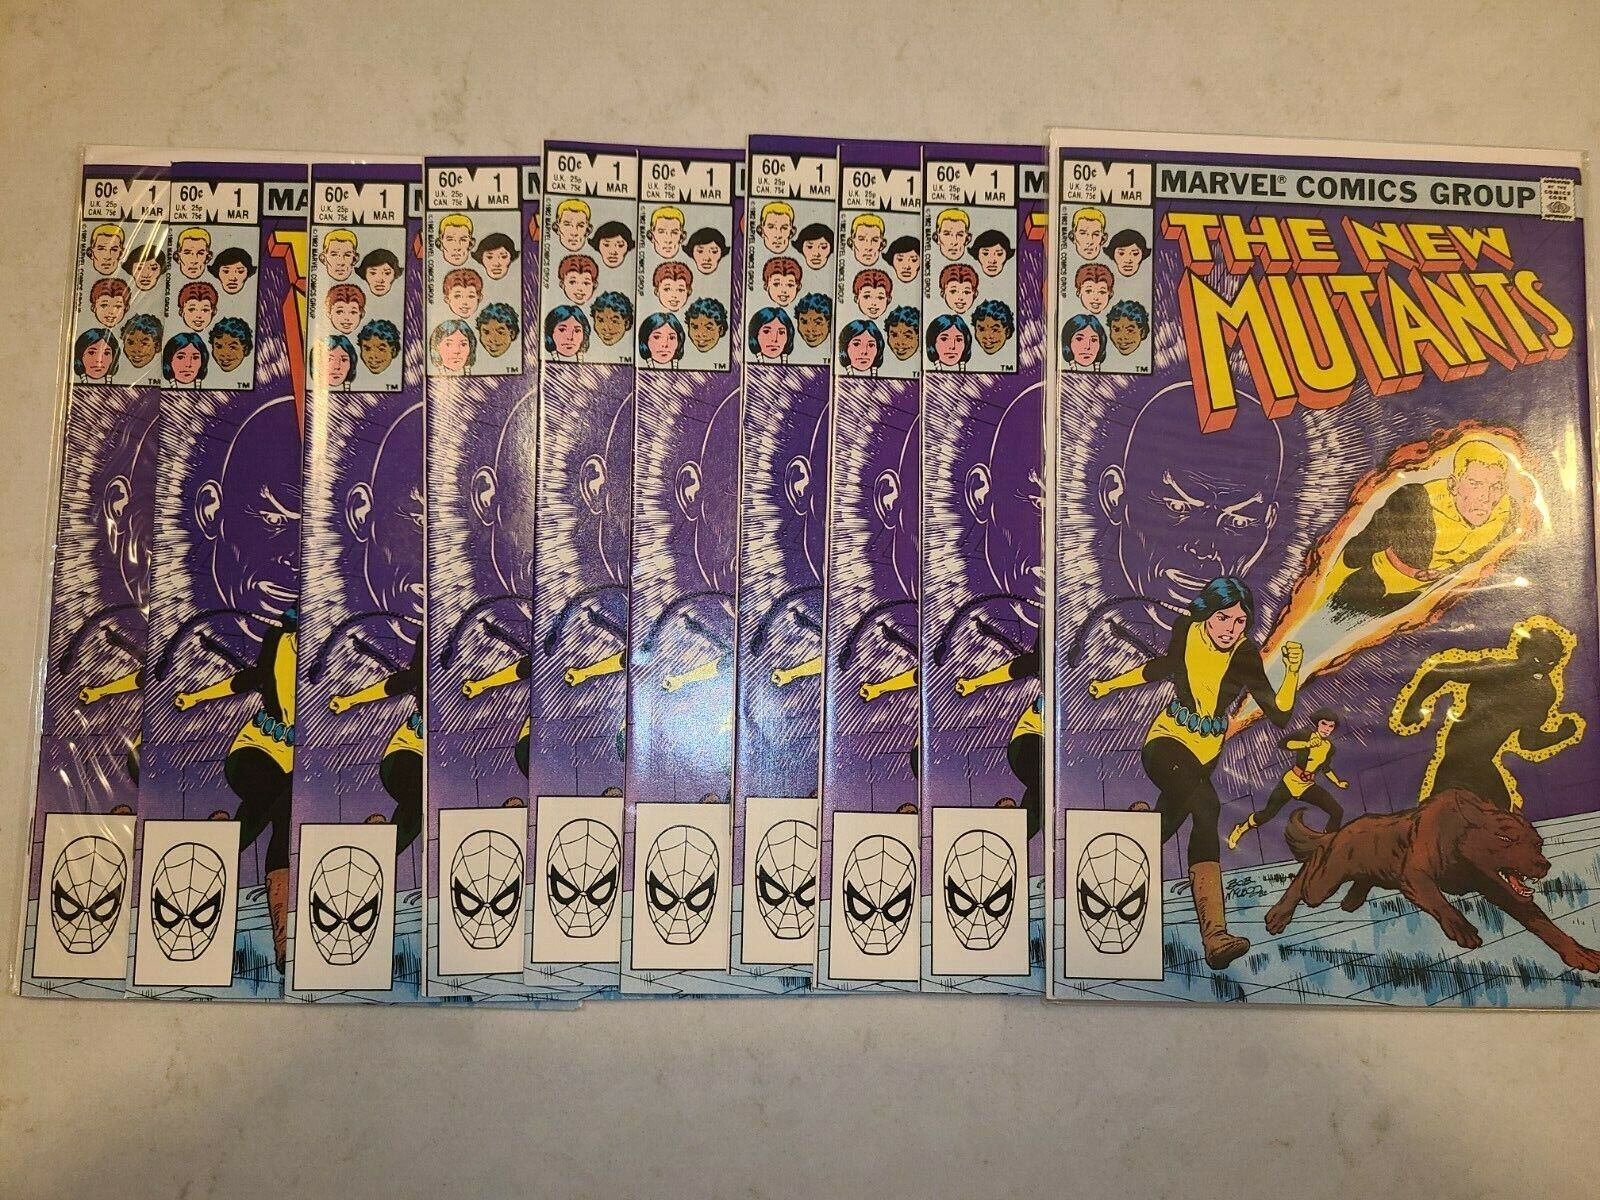 10 x copies The New Mutants #1 NM, March 1983, Marvel Investment Lot